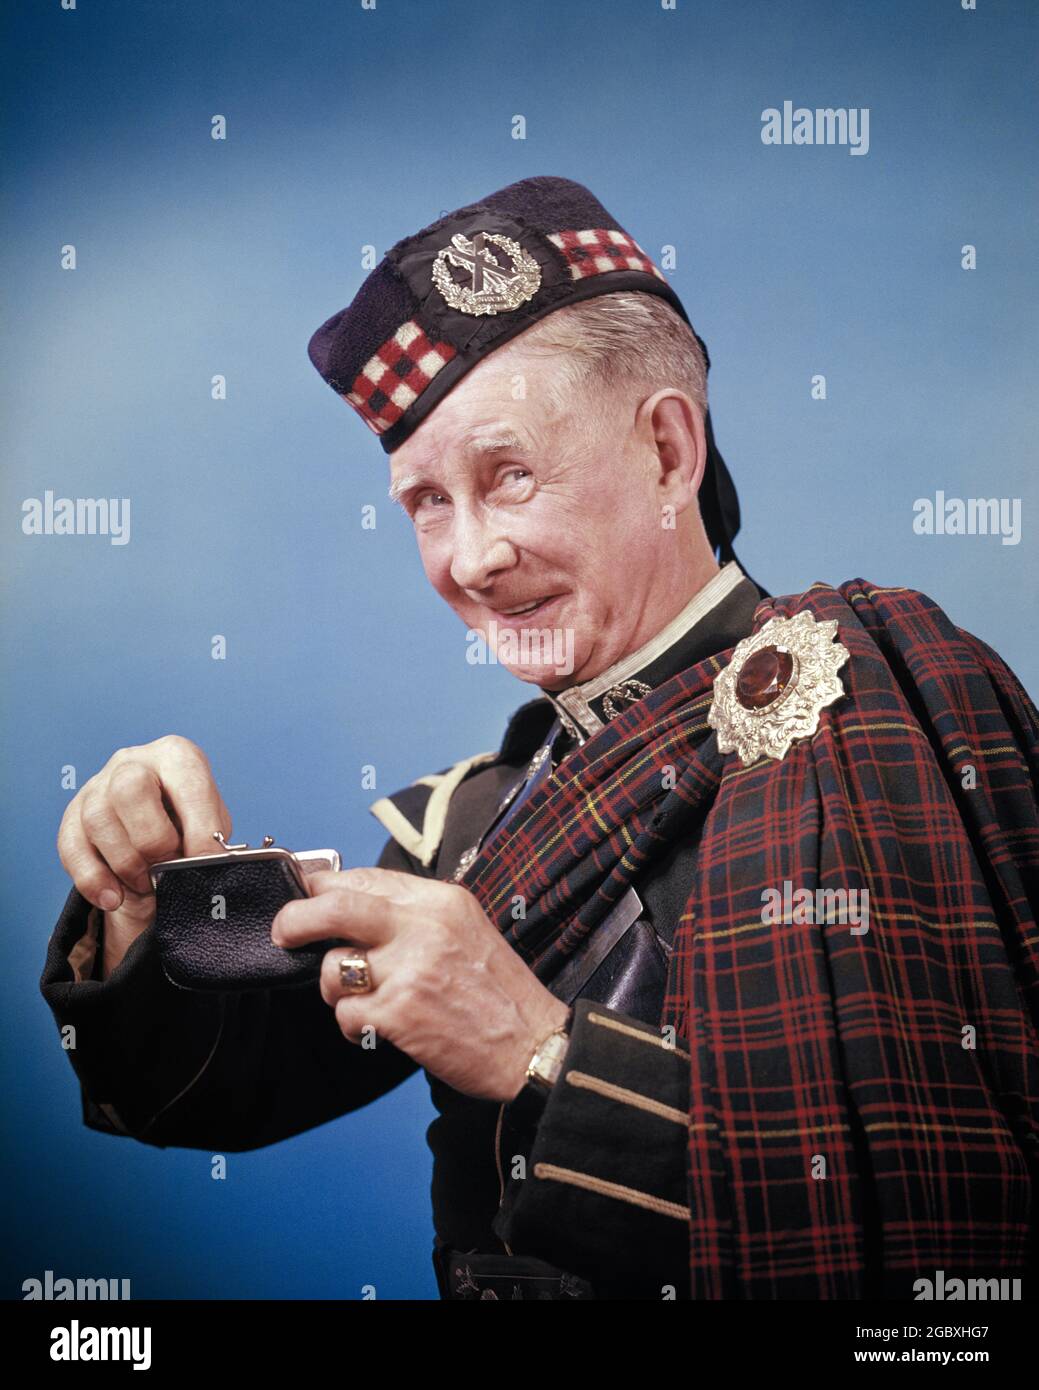 1950s 1960s SMILING CHARACTER MAN IN SCOTTISH TARTAN MILITARY COSTUME PUTTING A COIN INTO A CHANGE PURSE PINCHING A PENNY - kc1212 HAR001 HARS OLDSTER BROOCH FRUGAL SMILES TARTAN ELDERS GLENGARRY SCOT JOYFUL SCOTCH ECONOMICAL ELDERLY MAN PENNY-PINCHING SMART PARSIMONIOUS REGIMENTAL BADGE CAUCASIAN ETHNICITY DICING HAR001 OLD FASHIONED Stock Photo